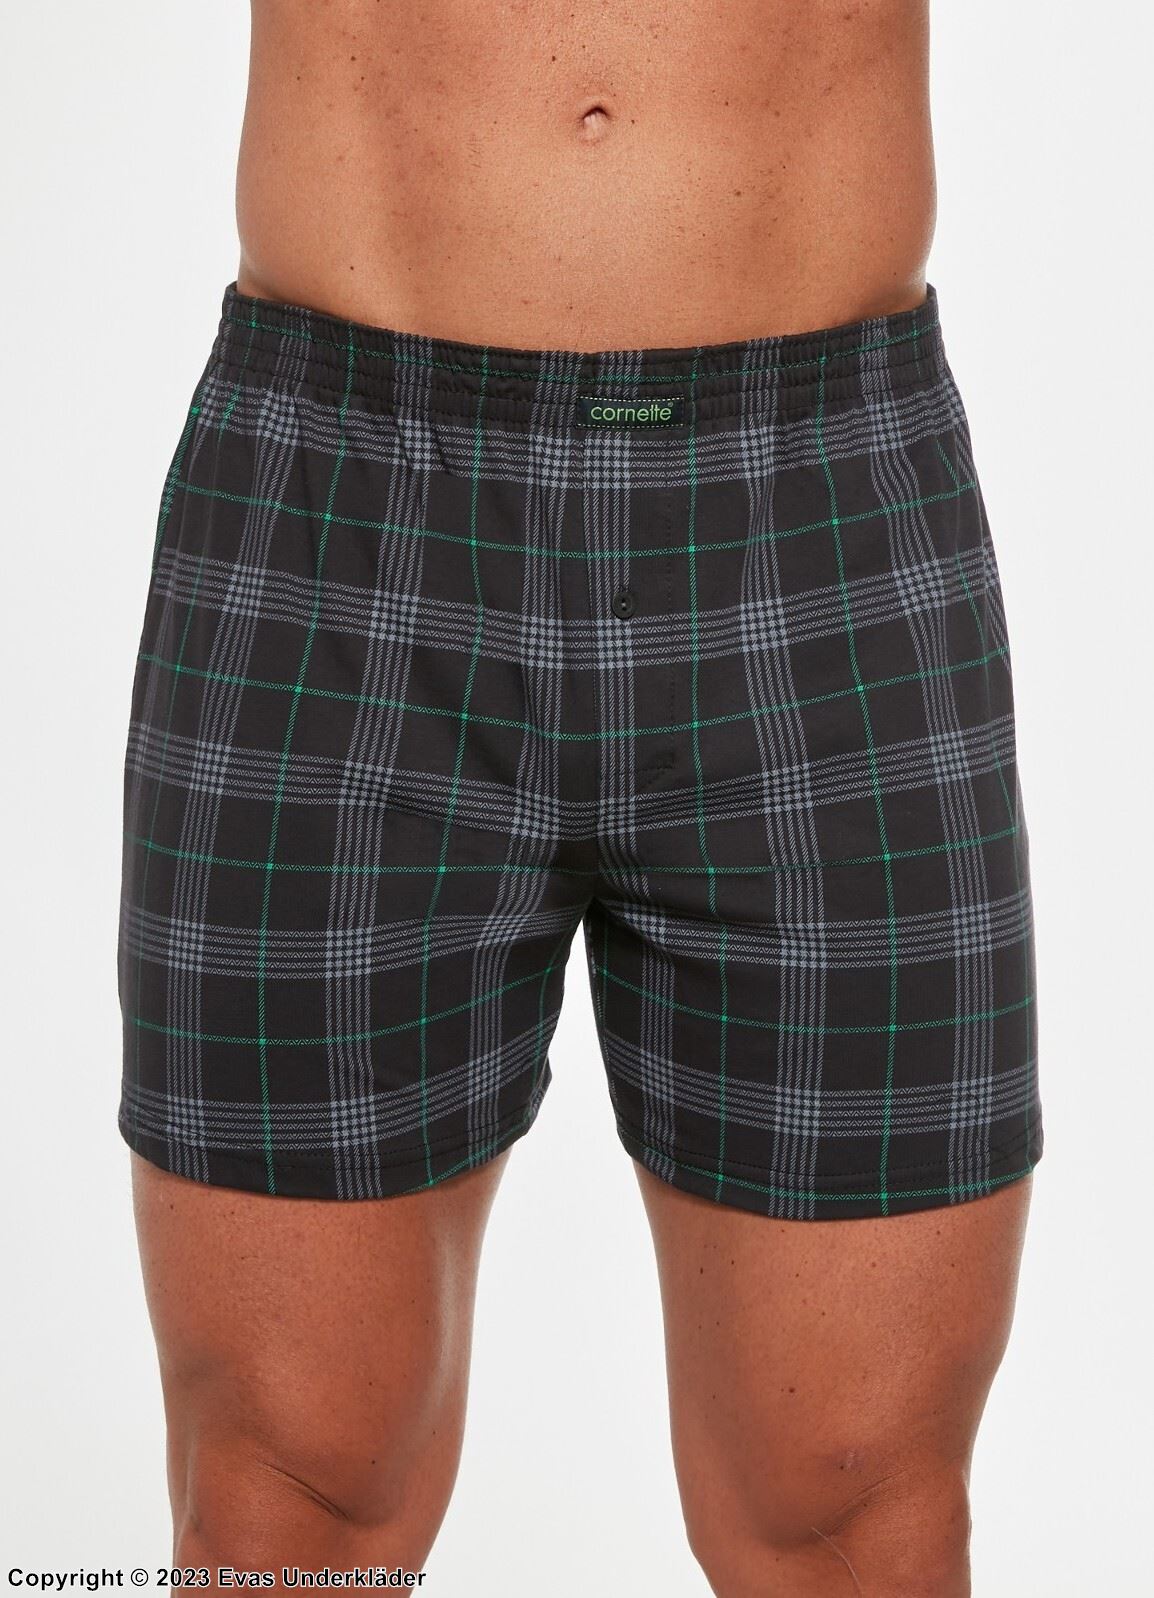 Men's boxer briefs, cotton, without fly, scott-checkered pattern